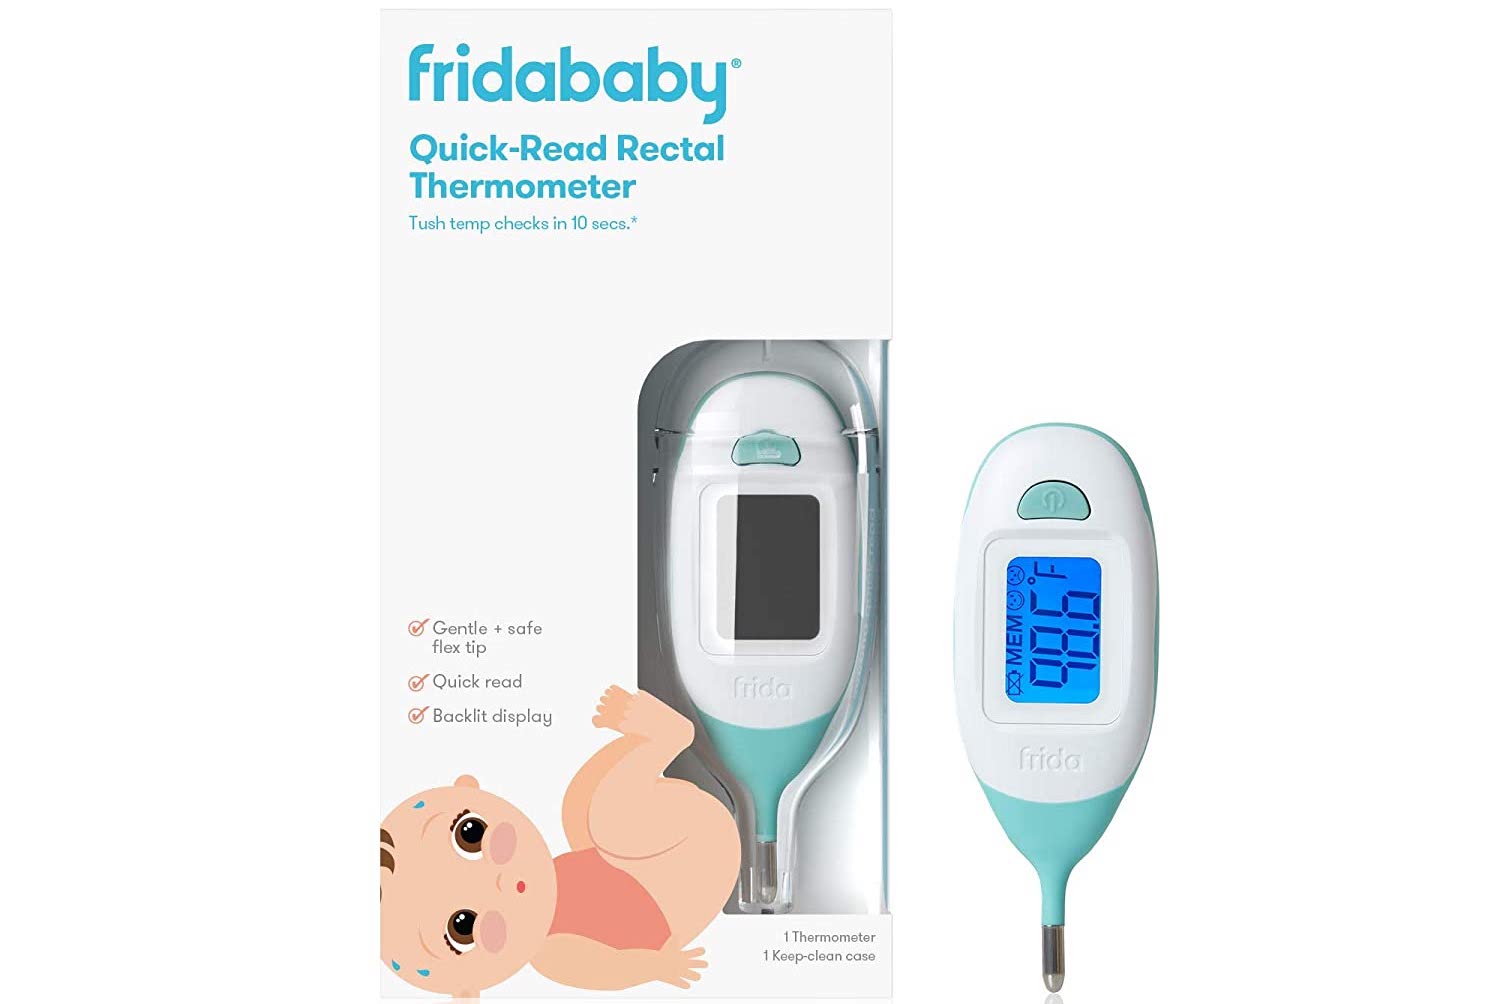 Fridababy rectal thermometer